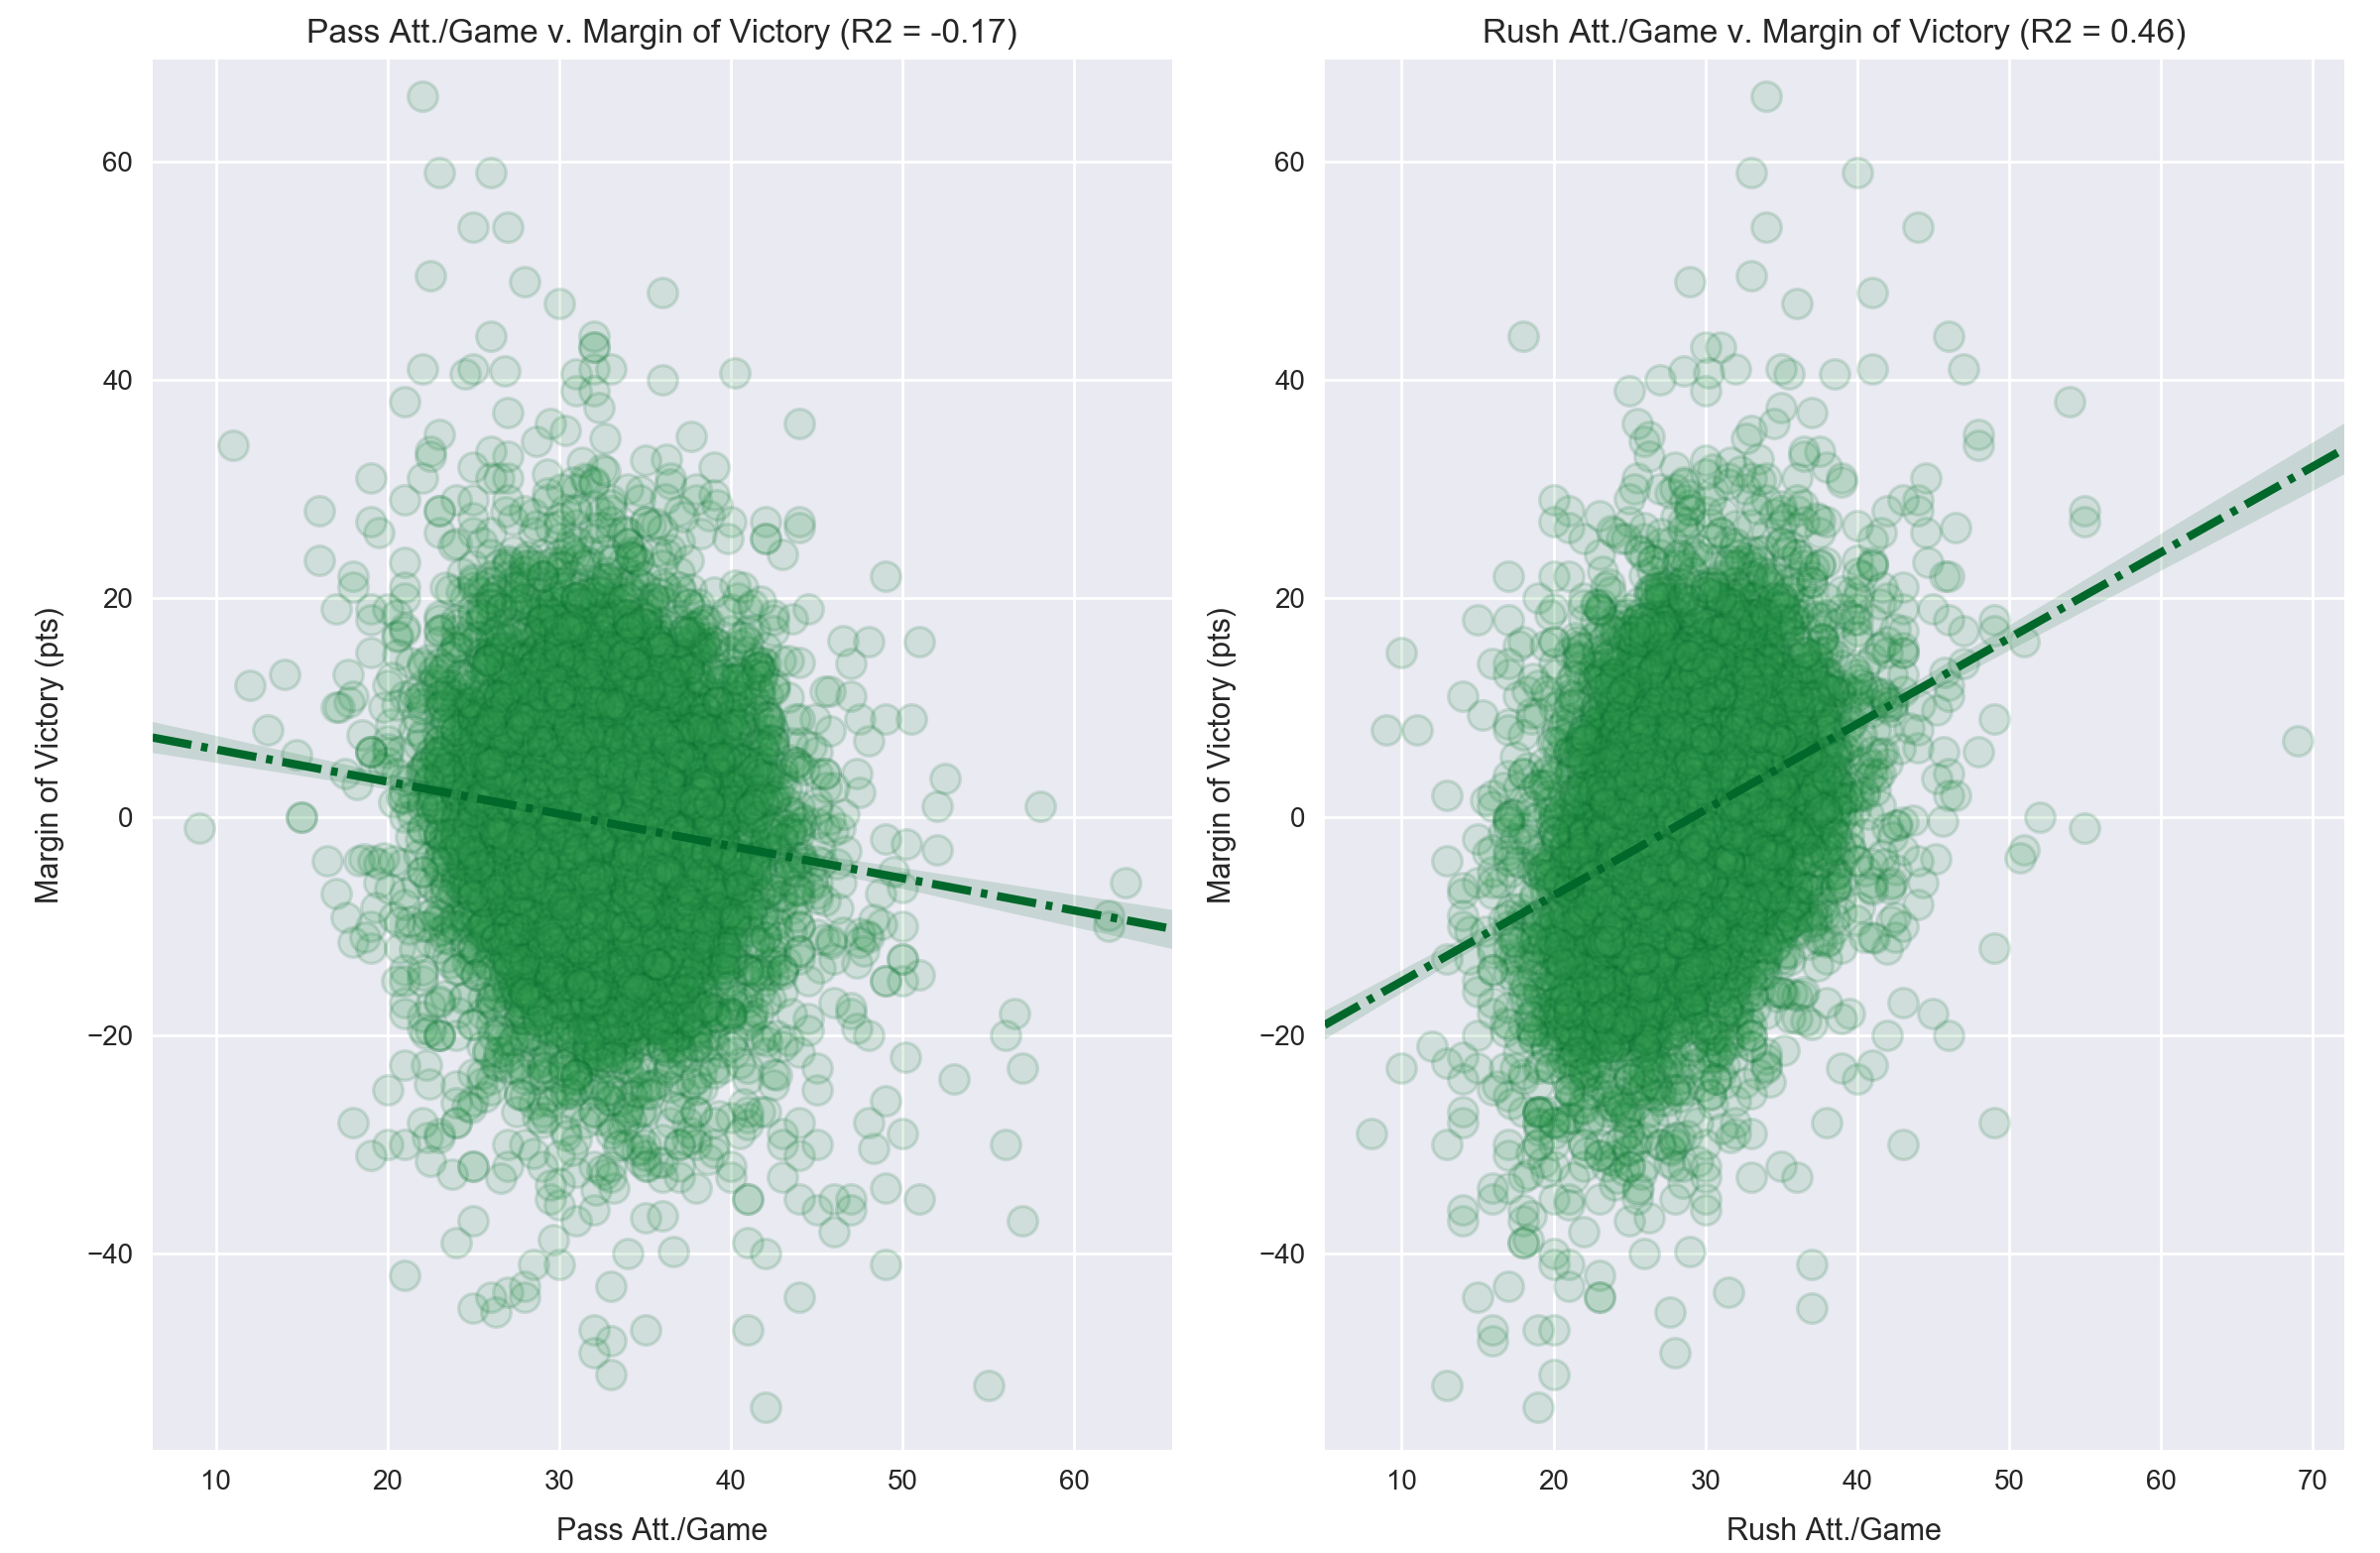 Passing and Rushing Correlation to Margin of Victory